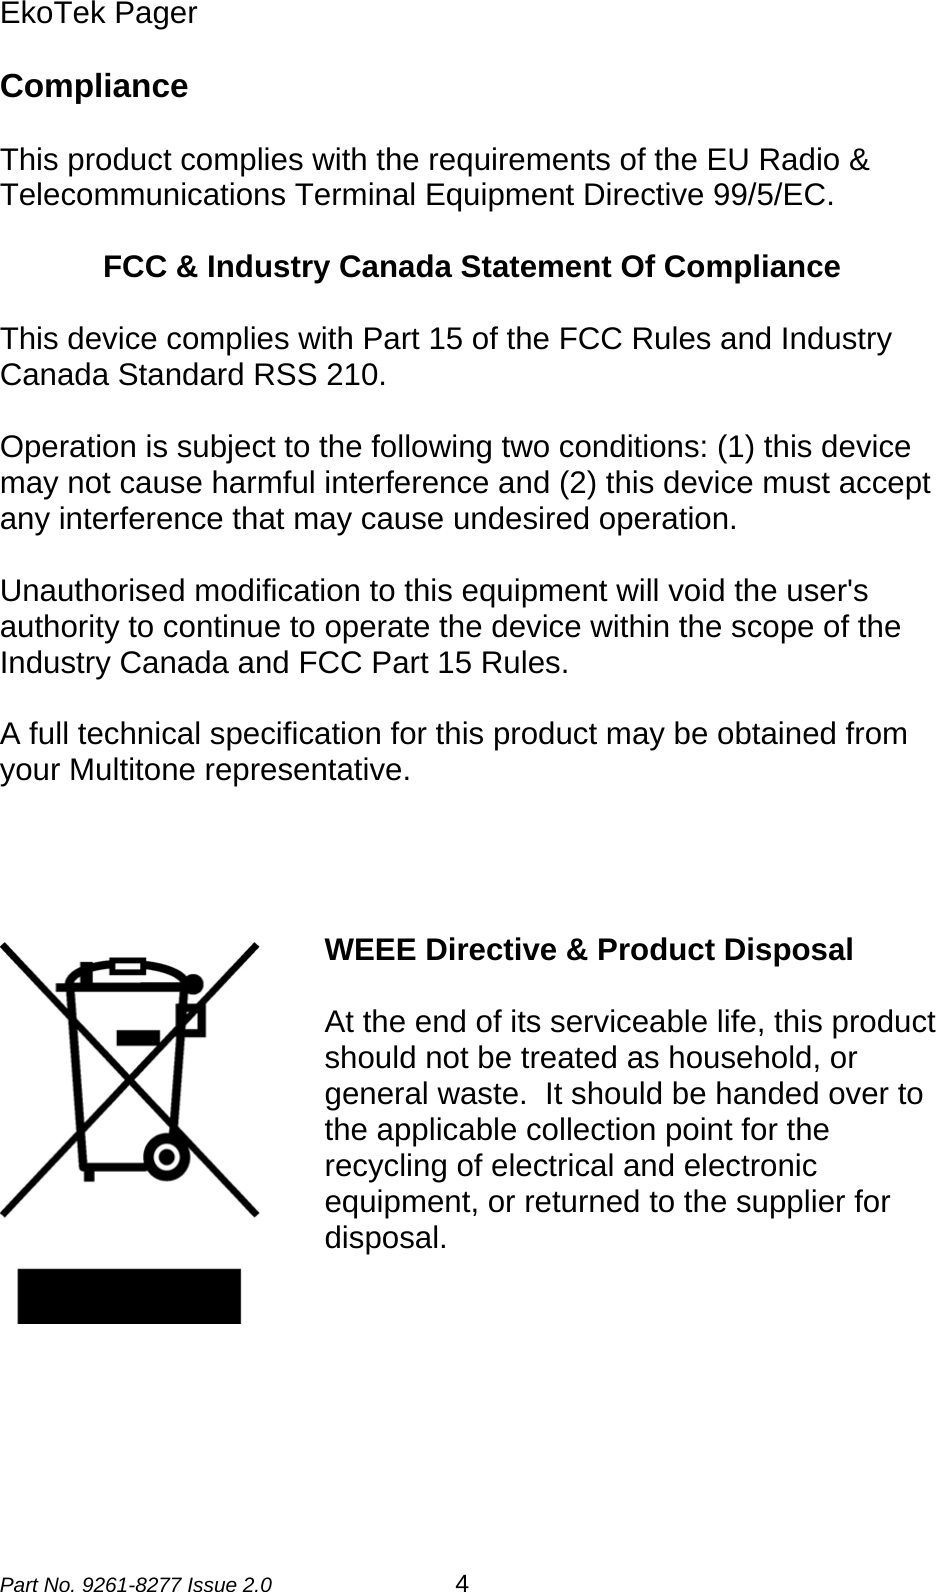 EkoTek Pager  Compliance   This product complies with the requirements of the EU Radio &amp; Telecommunications Terminal Equipment Directive 99/5/EC.    FCC &amp; Industry Canada Statement Of Compliance  This device complies with Part 15 of the FCC Rules and Industry Canada Standard RSS 210.  Operation is subject to the following two conditions: (1) this device may not cause harmful interference and (2) this device must accept any interference that may cause undesired operation.  Unauthorised modification to this equipment will void the user&apos;s authority to continue to operate the device within the scope of the Industry Canada and FCC Part 15 Rules.  A full technical specification for this product may be obtained from your Multitone representative.     WEEE Directive &amp; Product Disposal   At the end of its serviceable life, this product should not be treated as household, or general waste.  It should be handed over to the applicable collection point for the recycling of electrical and electronic equipment, or returned to the supplier for disposal.    Part No. 9261-8277 Issue 2.0 4 